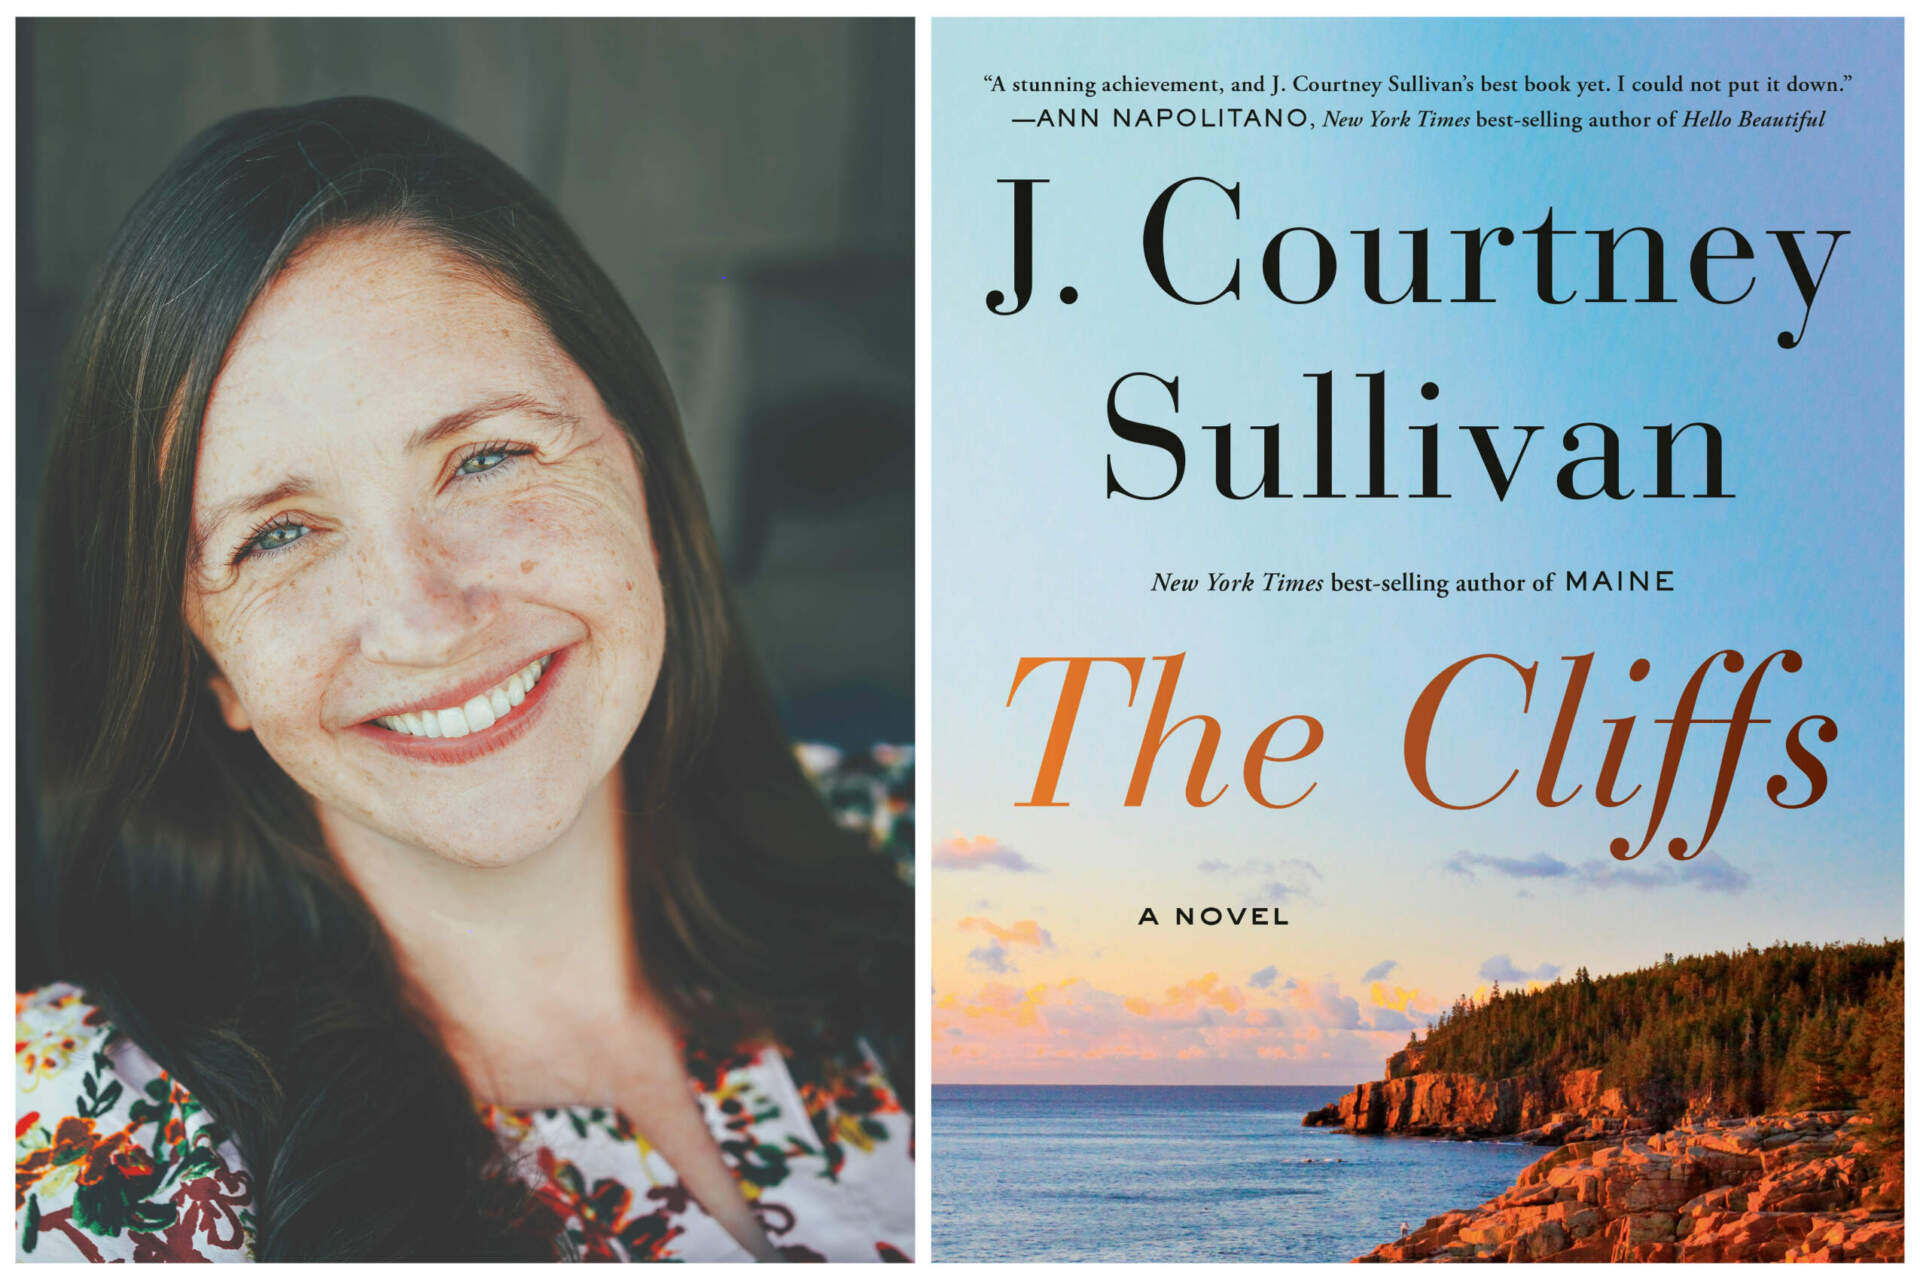 J. Courtney Sullivan's novel &quot;The Cliffs&quot; is out now. (Author photo courtesy Niall Fitzpatrick; book cover courtesy Knopf)